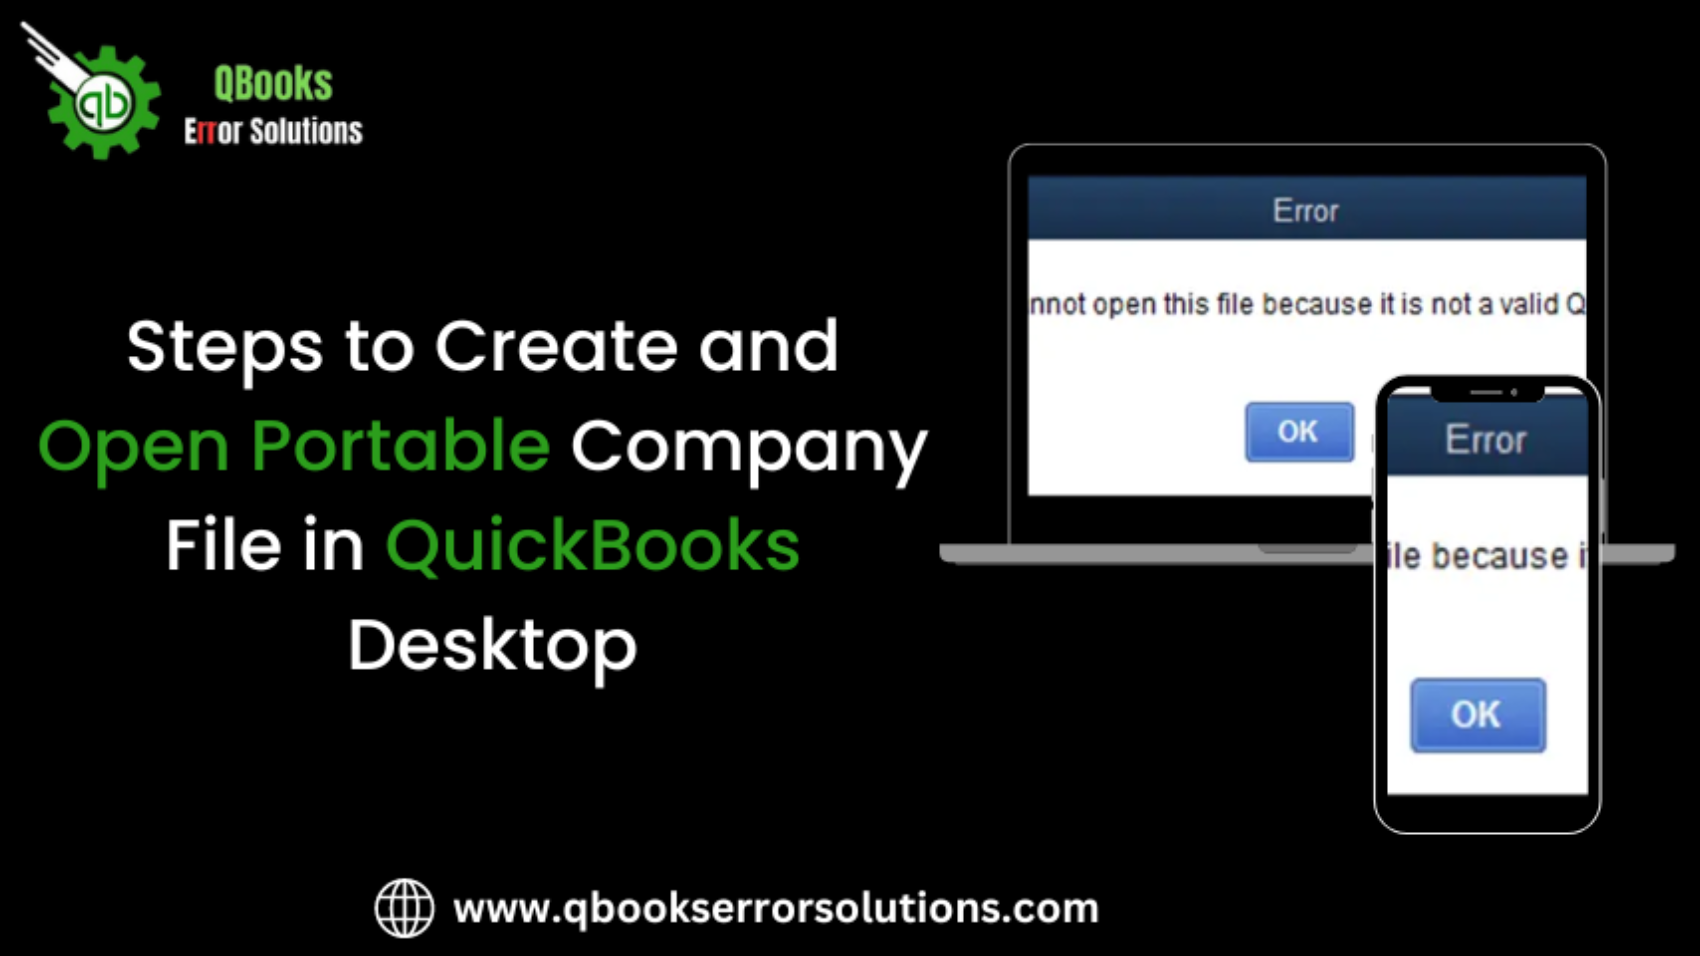 How to Create and Open Portable Company File in QuickBooks Desktop